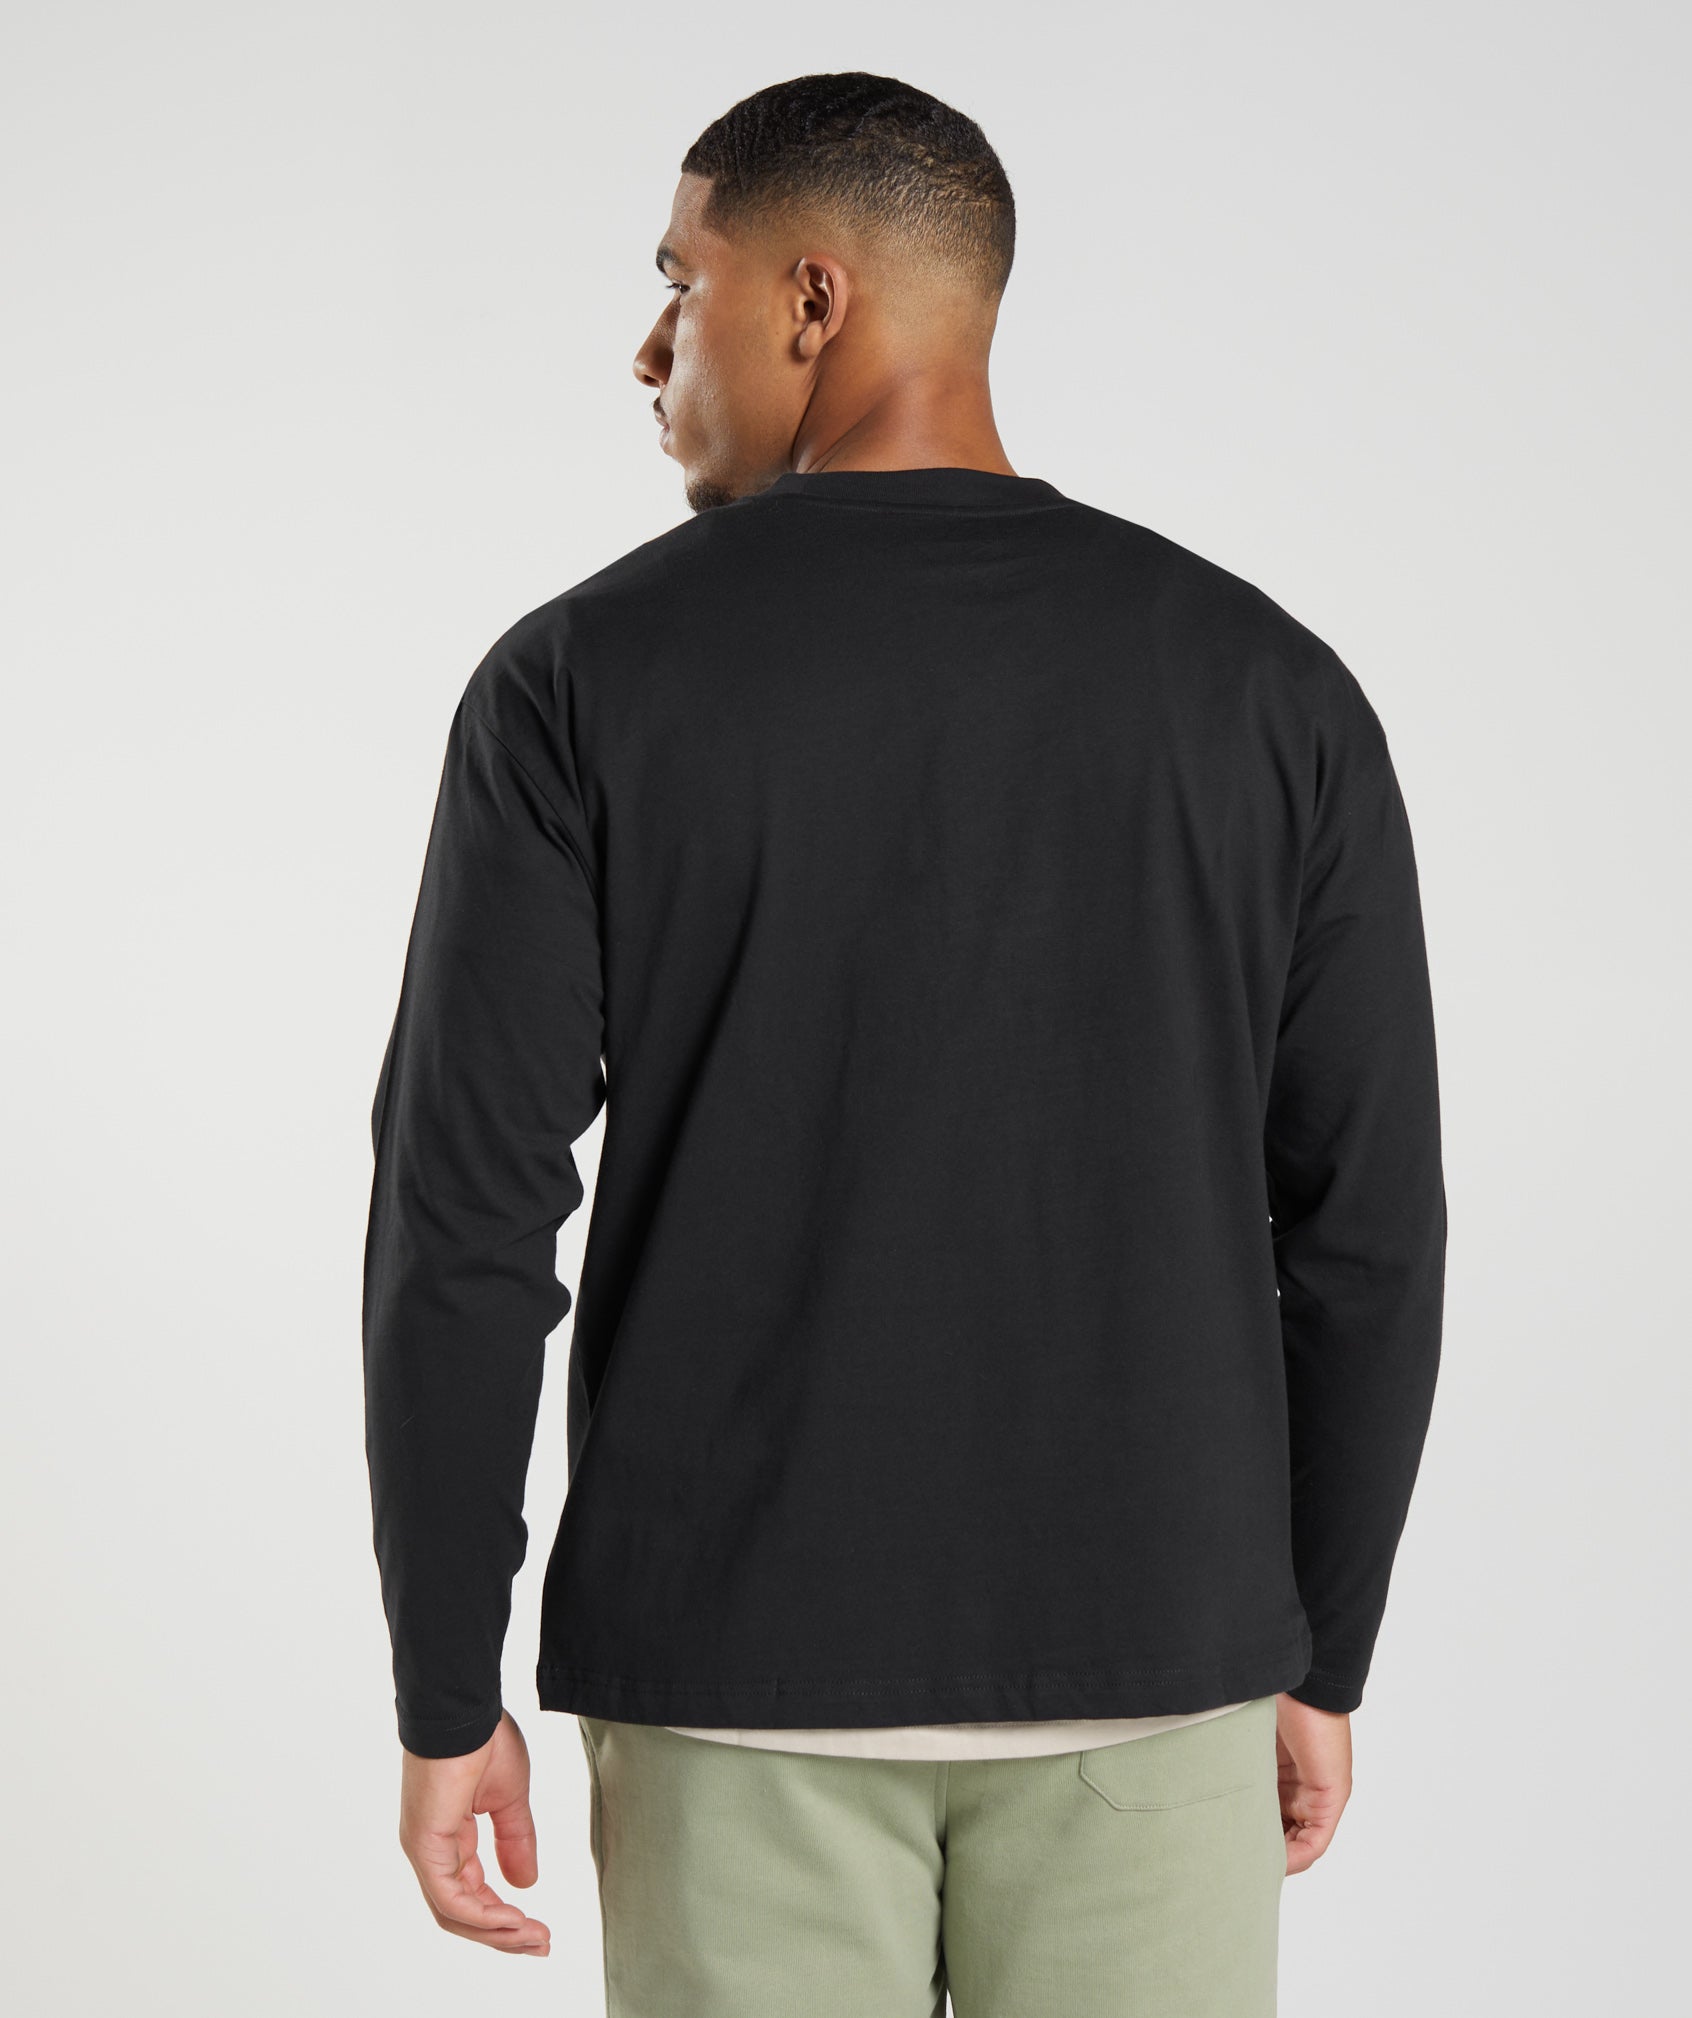 Rest Day Sweats Long Sleeve T-Shirt in Black - view 3